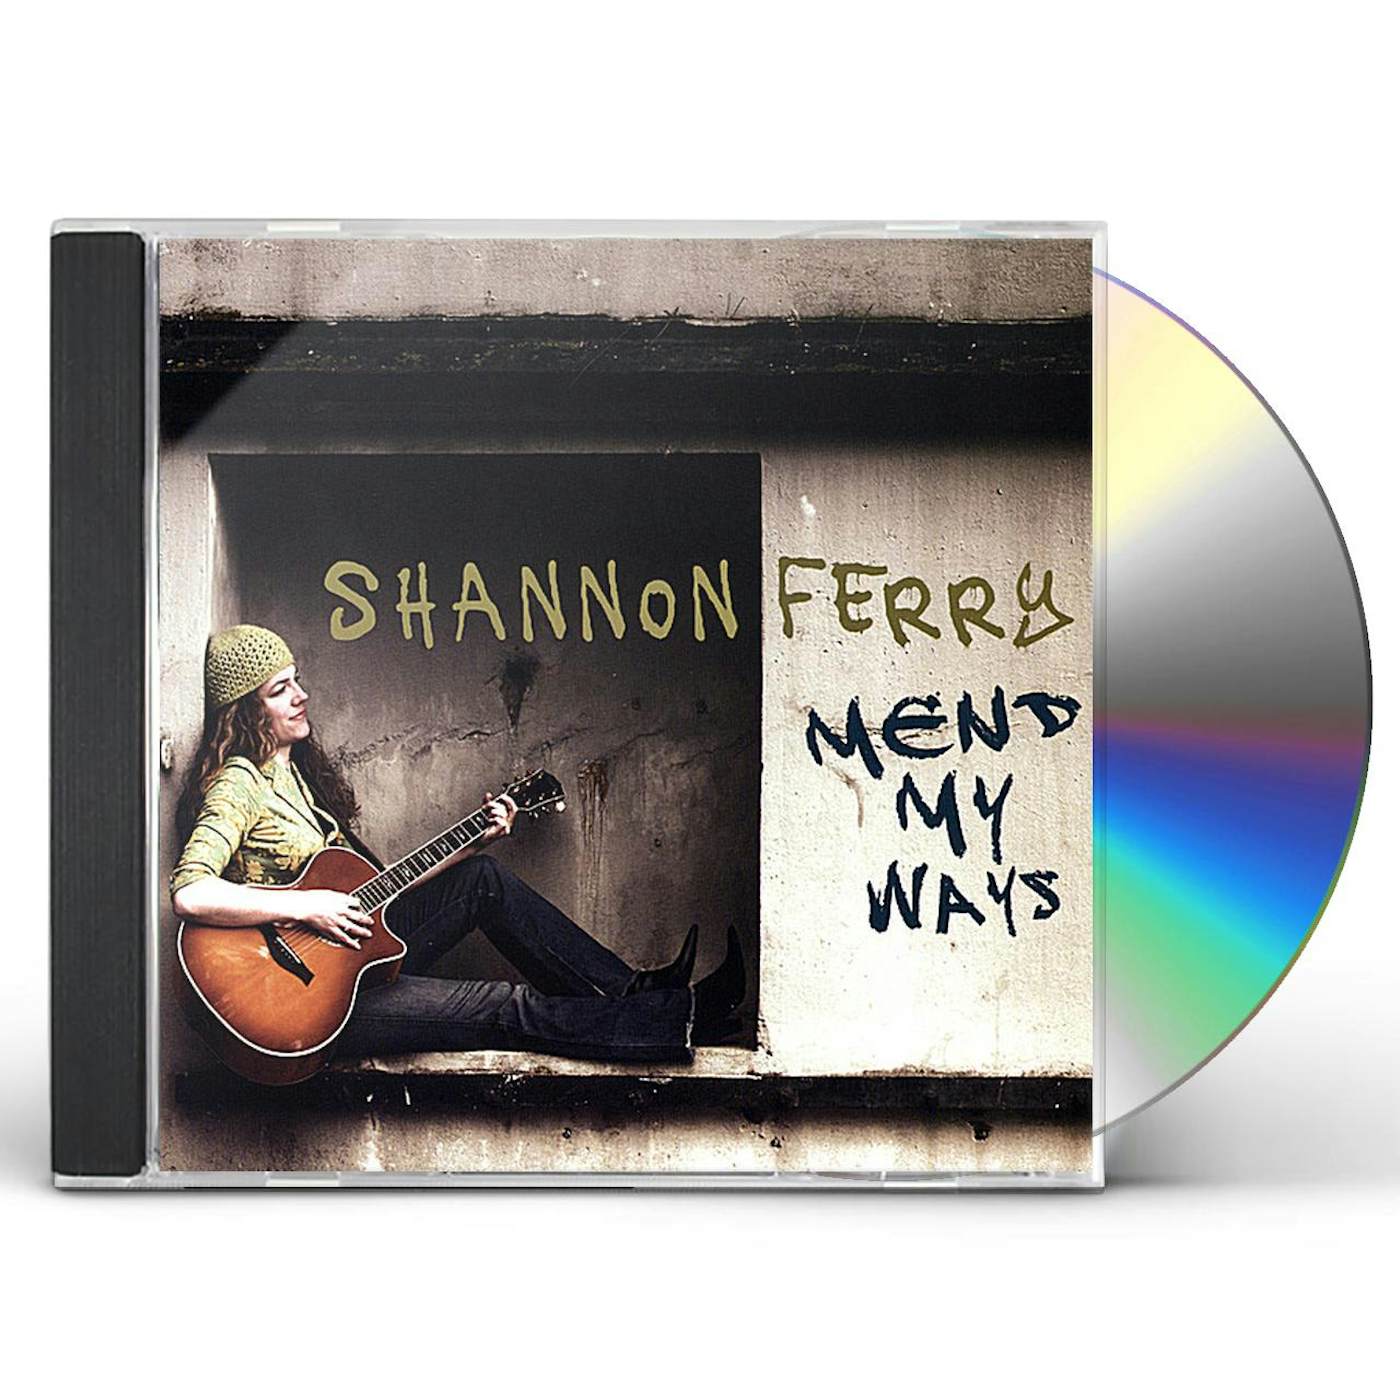 Shannon Ferry MEND MY WAYS CD